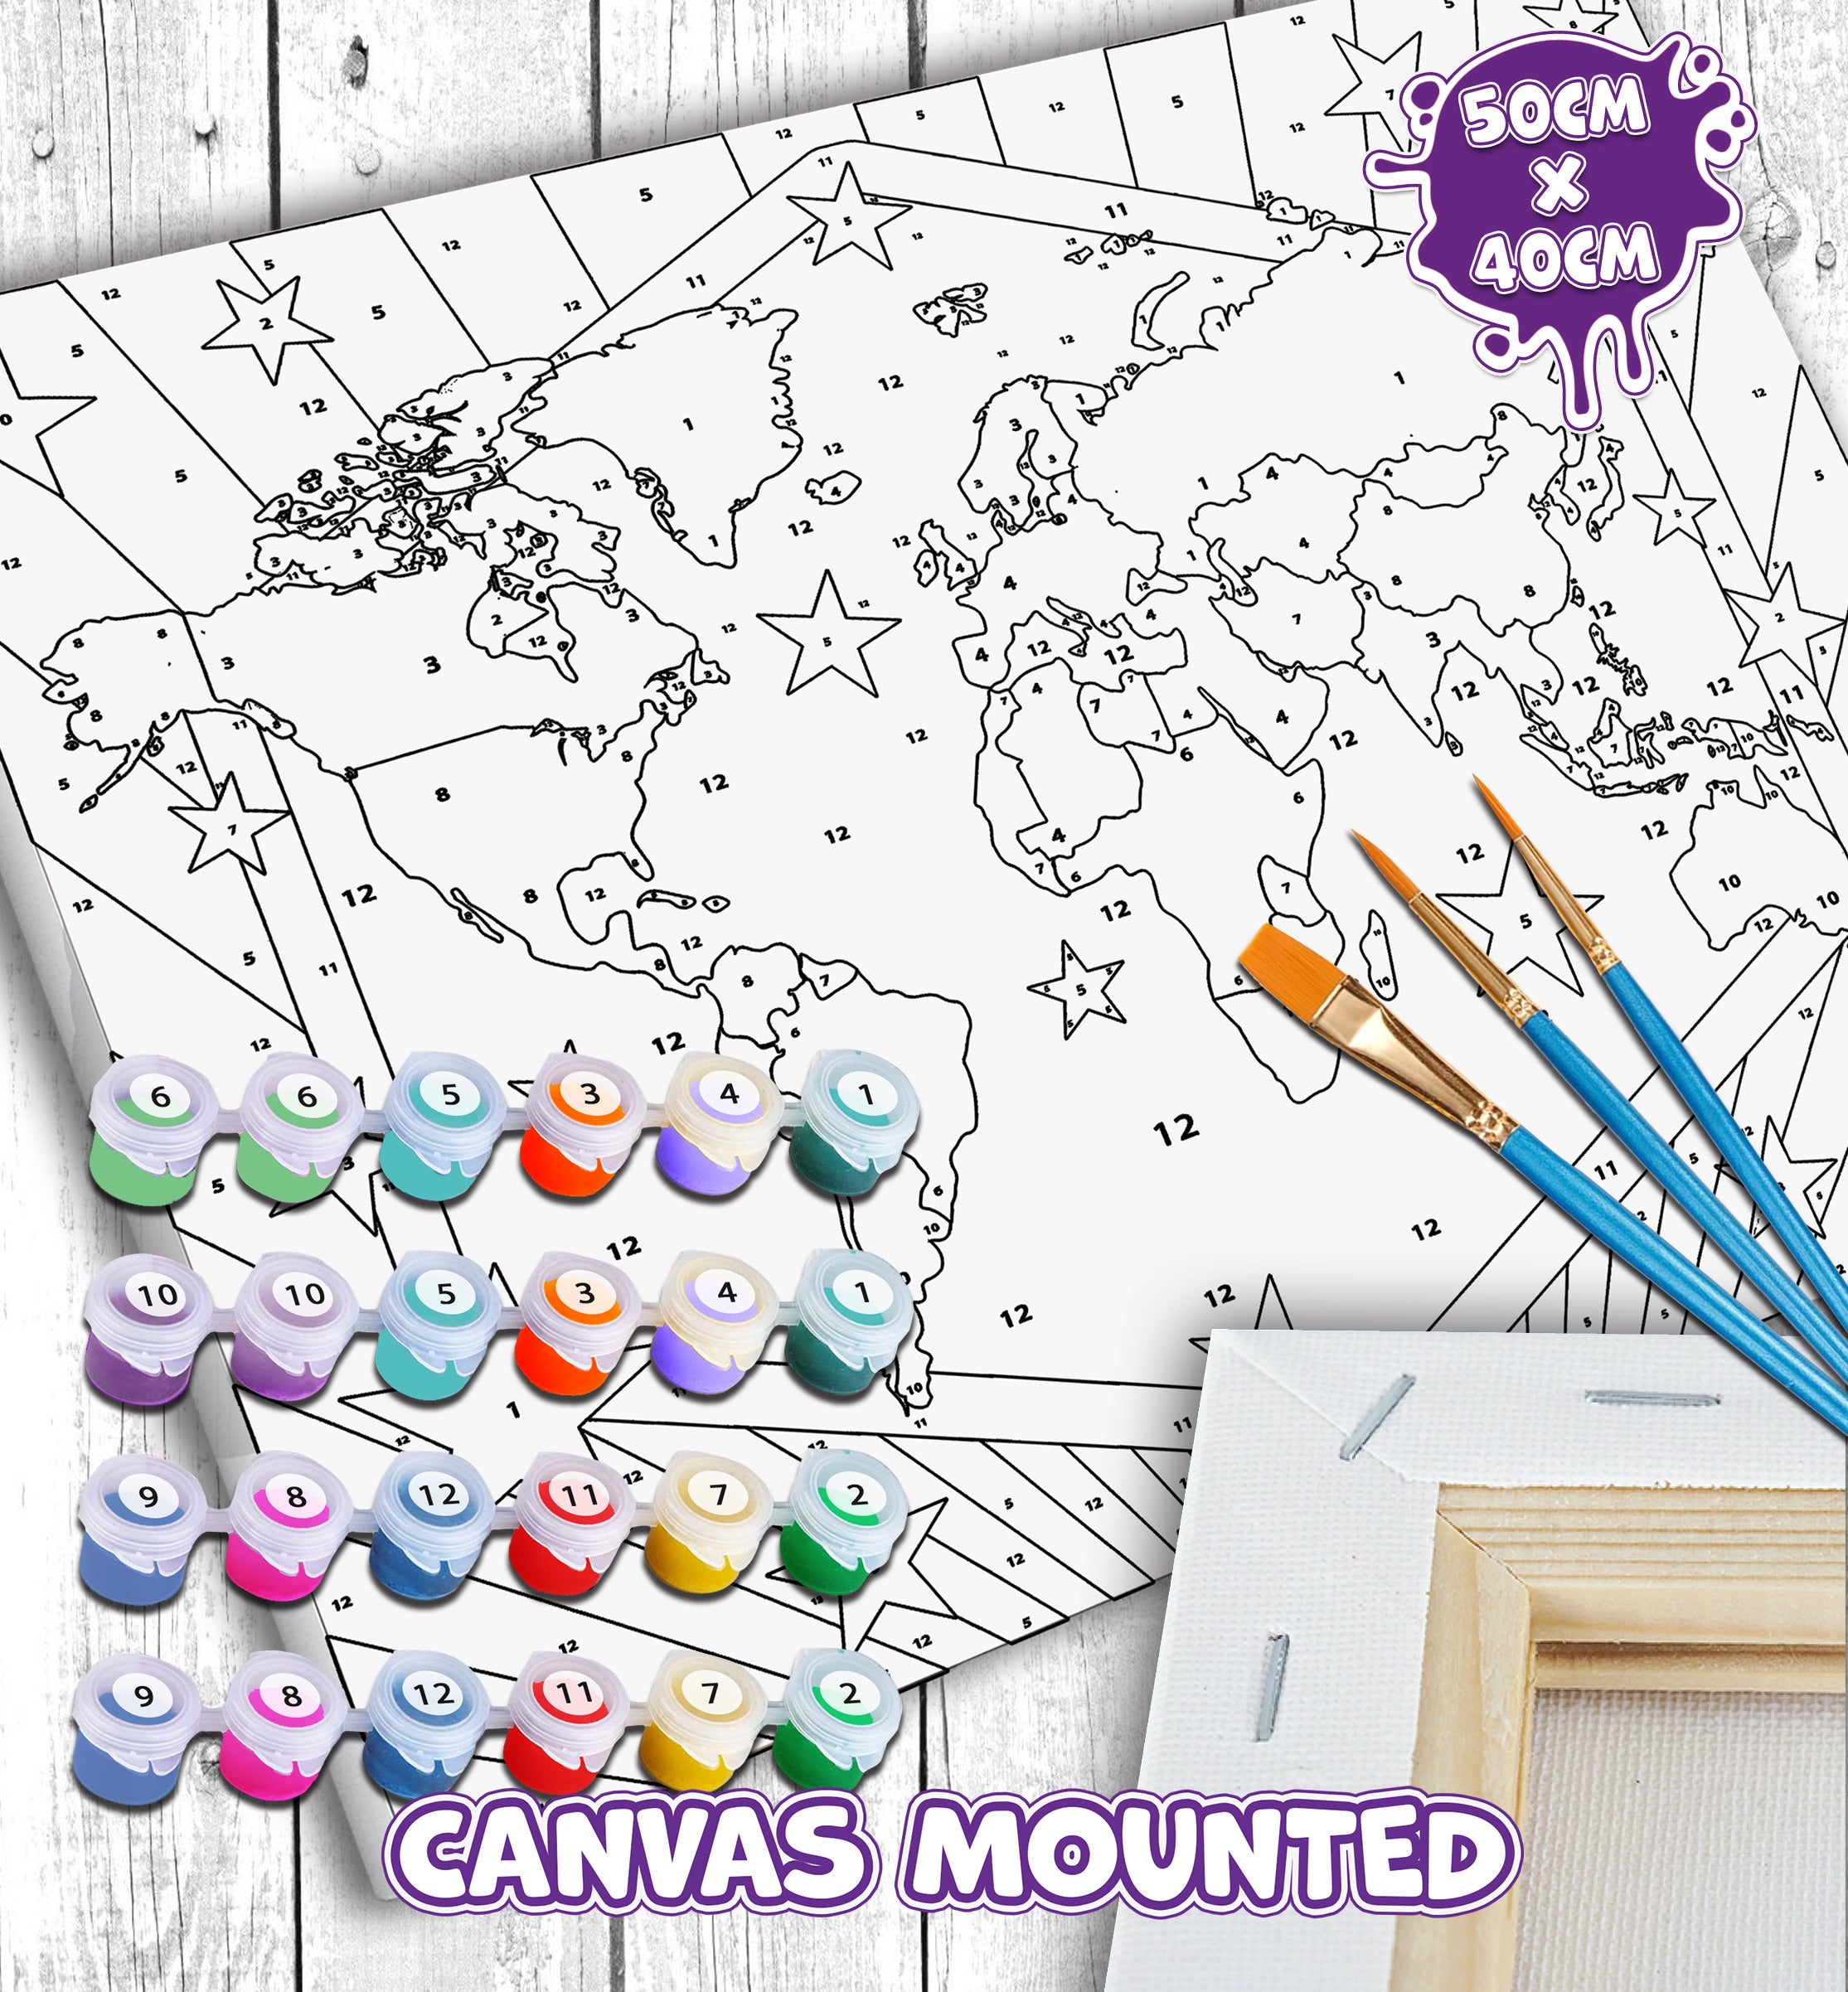 World map paint by number, world map painting, world map painting for kids, world map painting easy, world map painting by numbers uk, work map painting set, washable acrylic paints, world map gifts, paint by number on canvas, paint by numbers ready for wall mounting, paint by numbers for kids, paint by numbers for beginners, paint by numbers for children, paint by numbers with frame, world map canvas, world map wall art, world map poster for kids